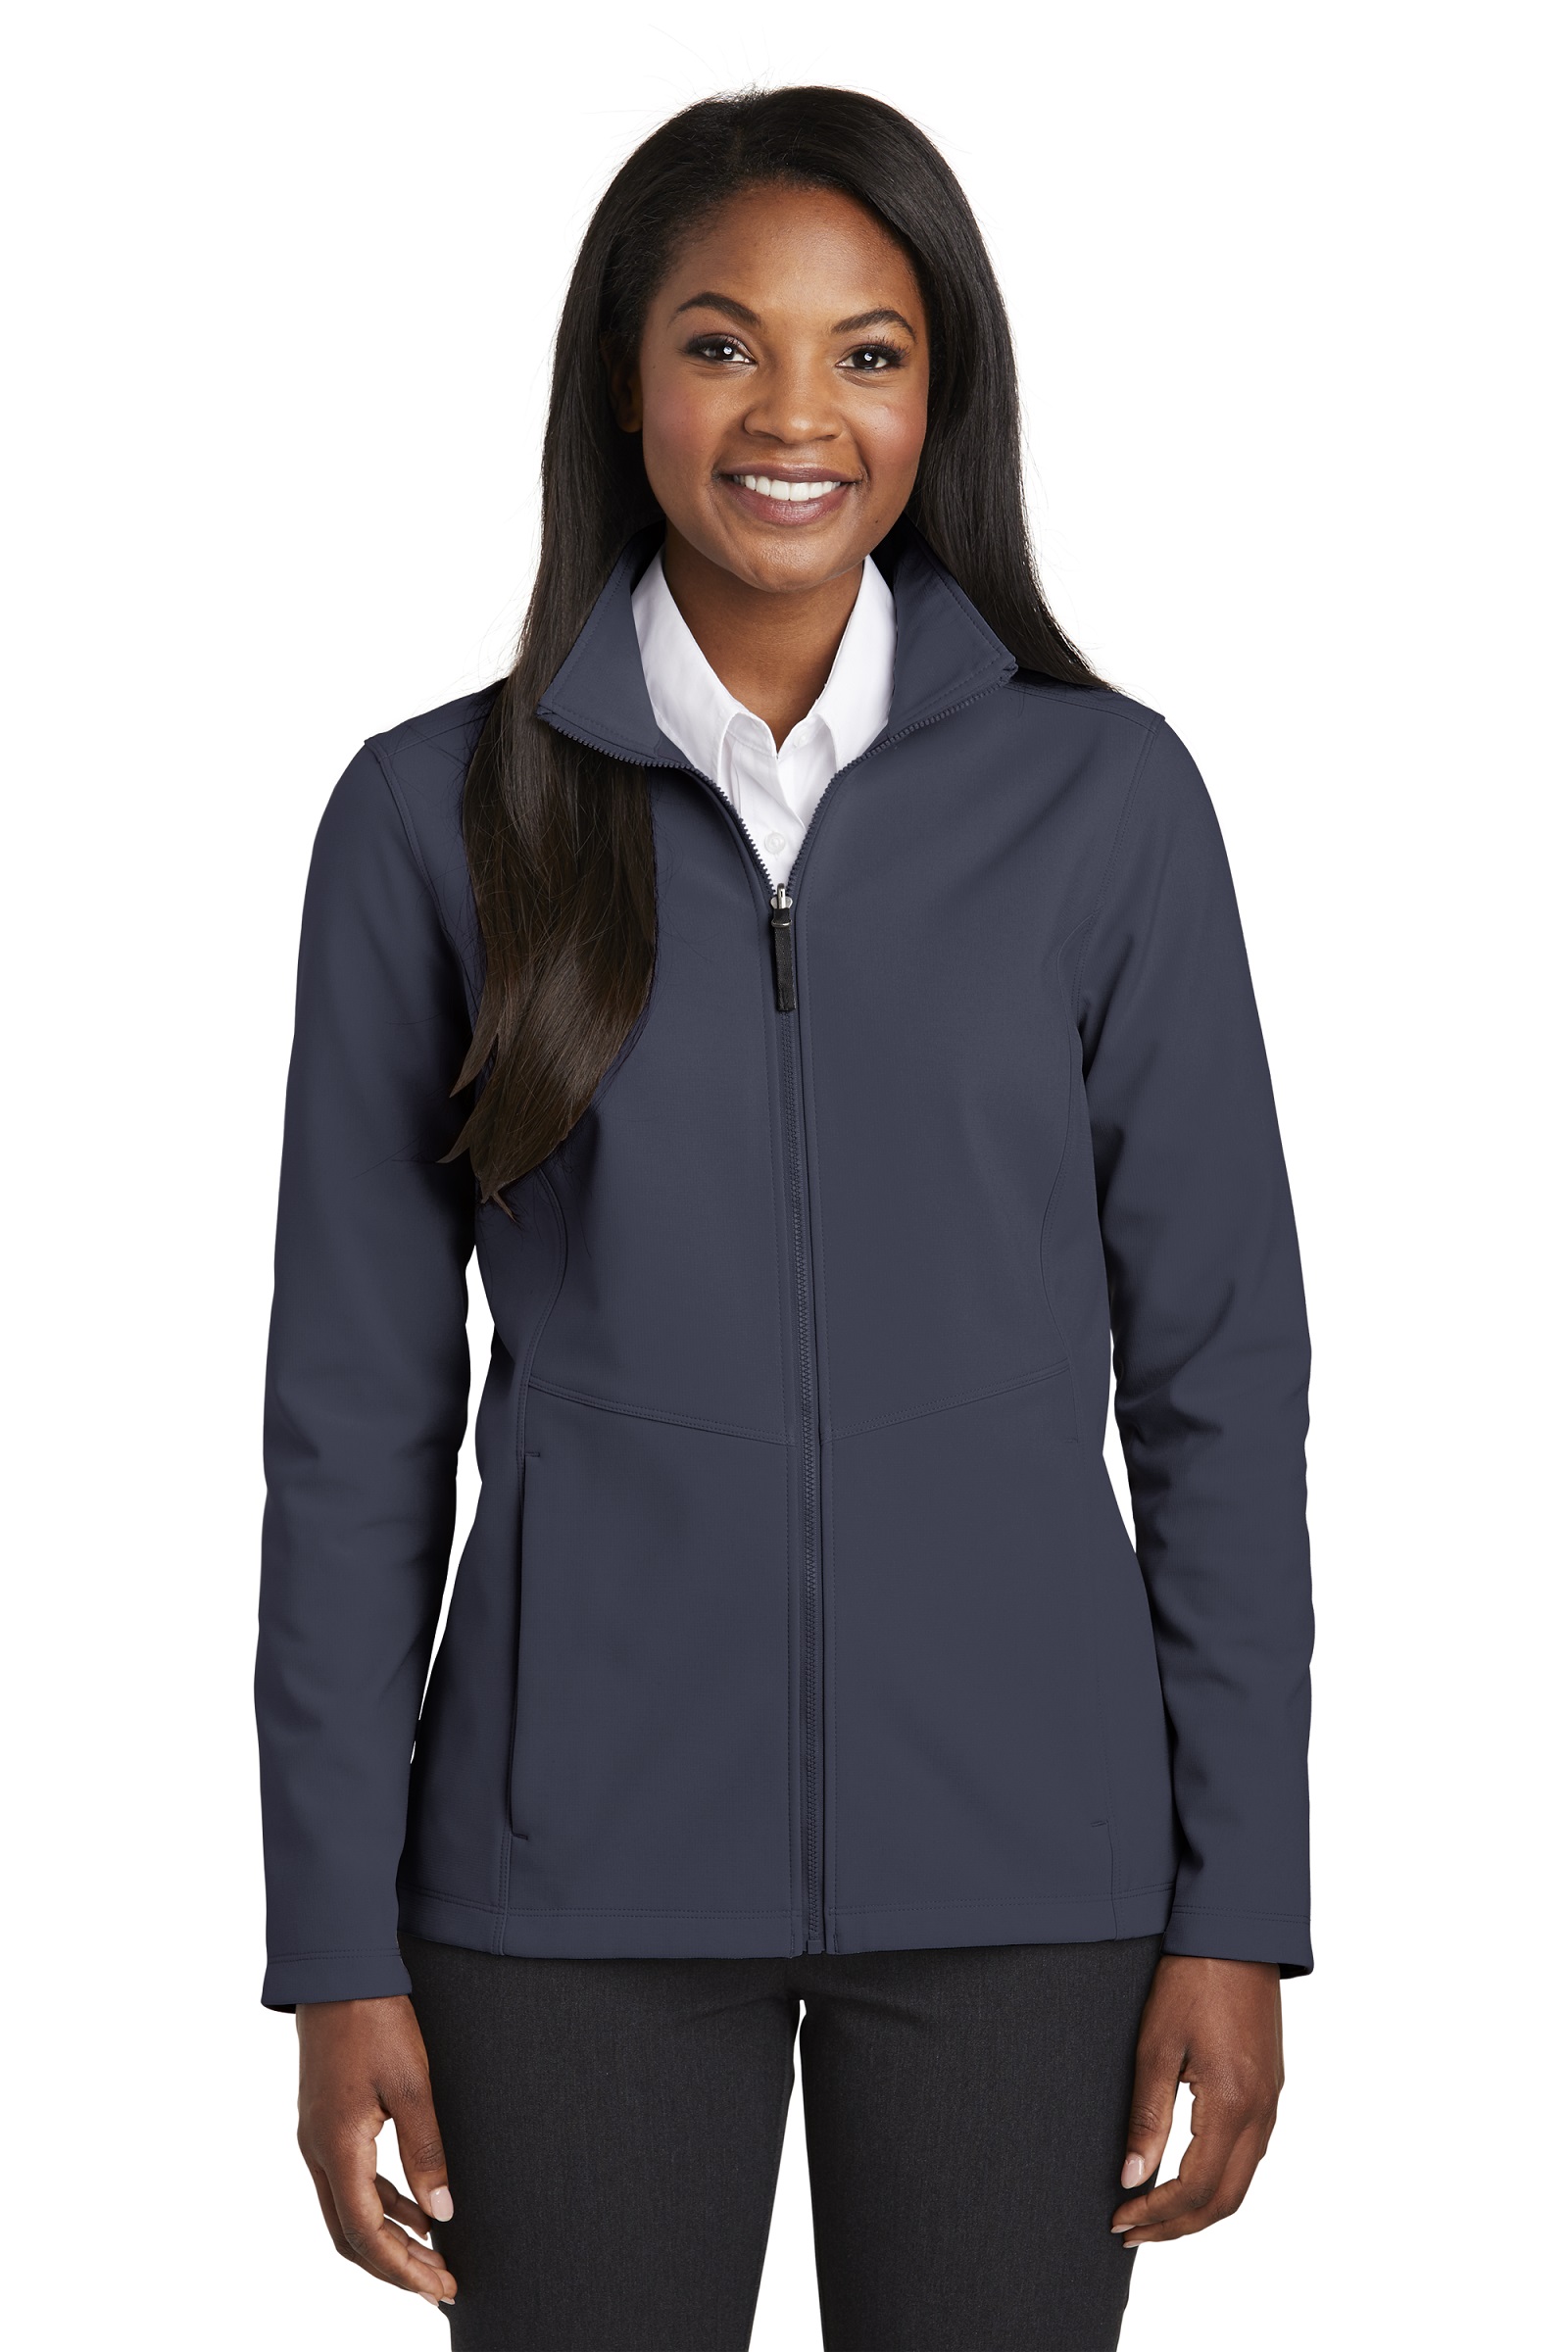 Port Authority Embroidered Women's Collective Soft Shell Jacket